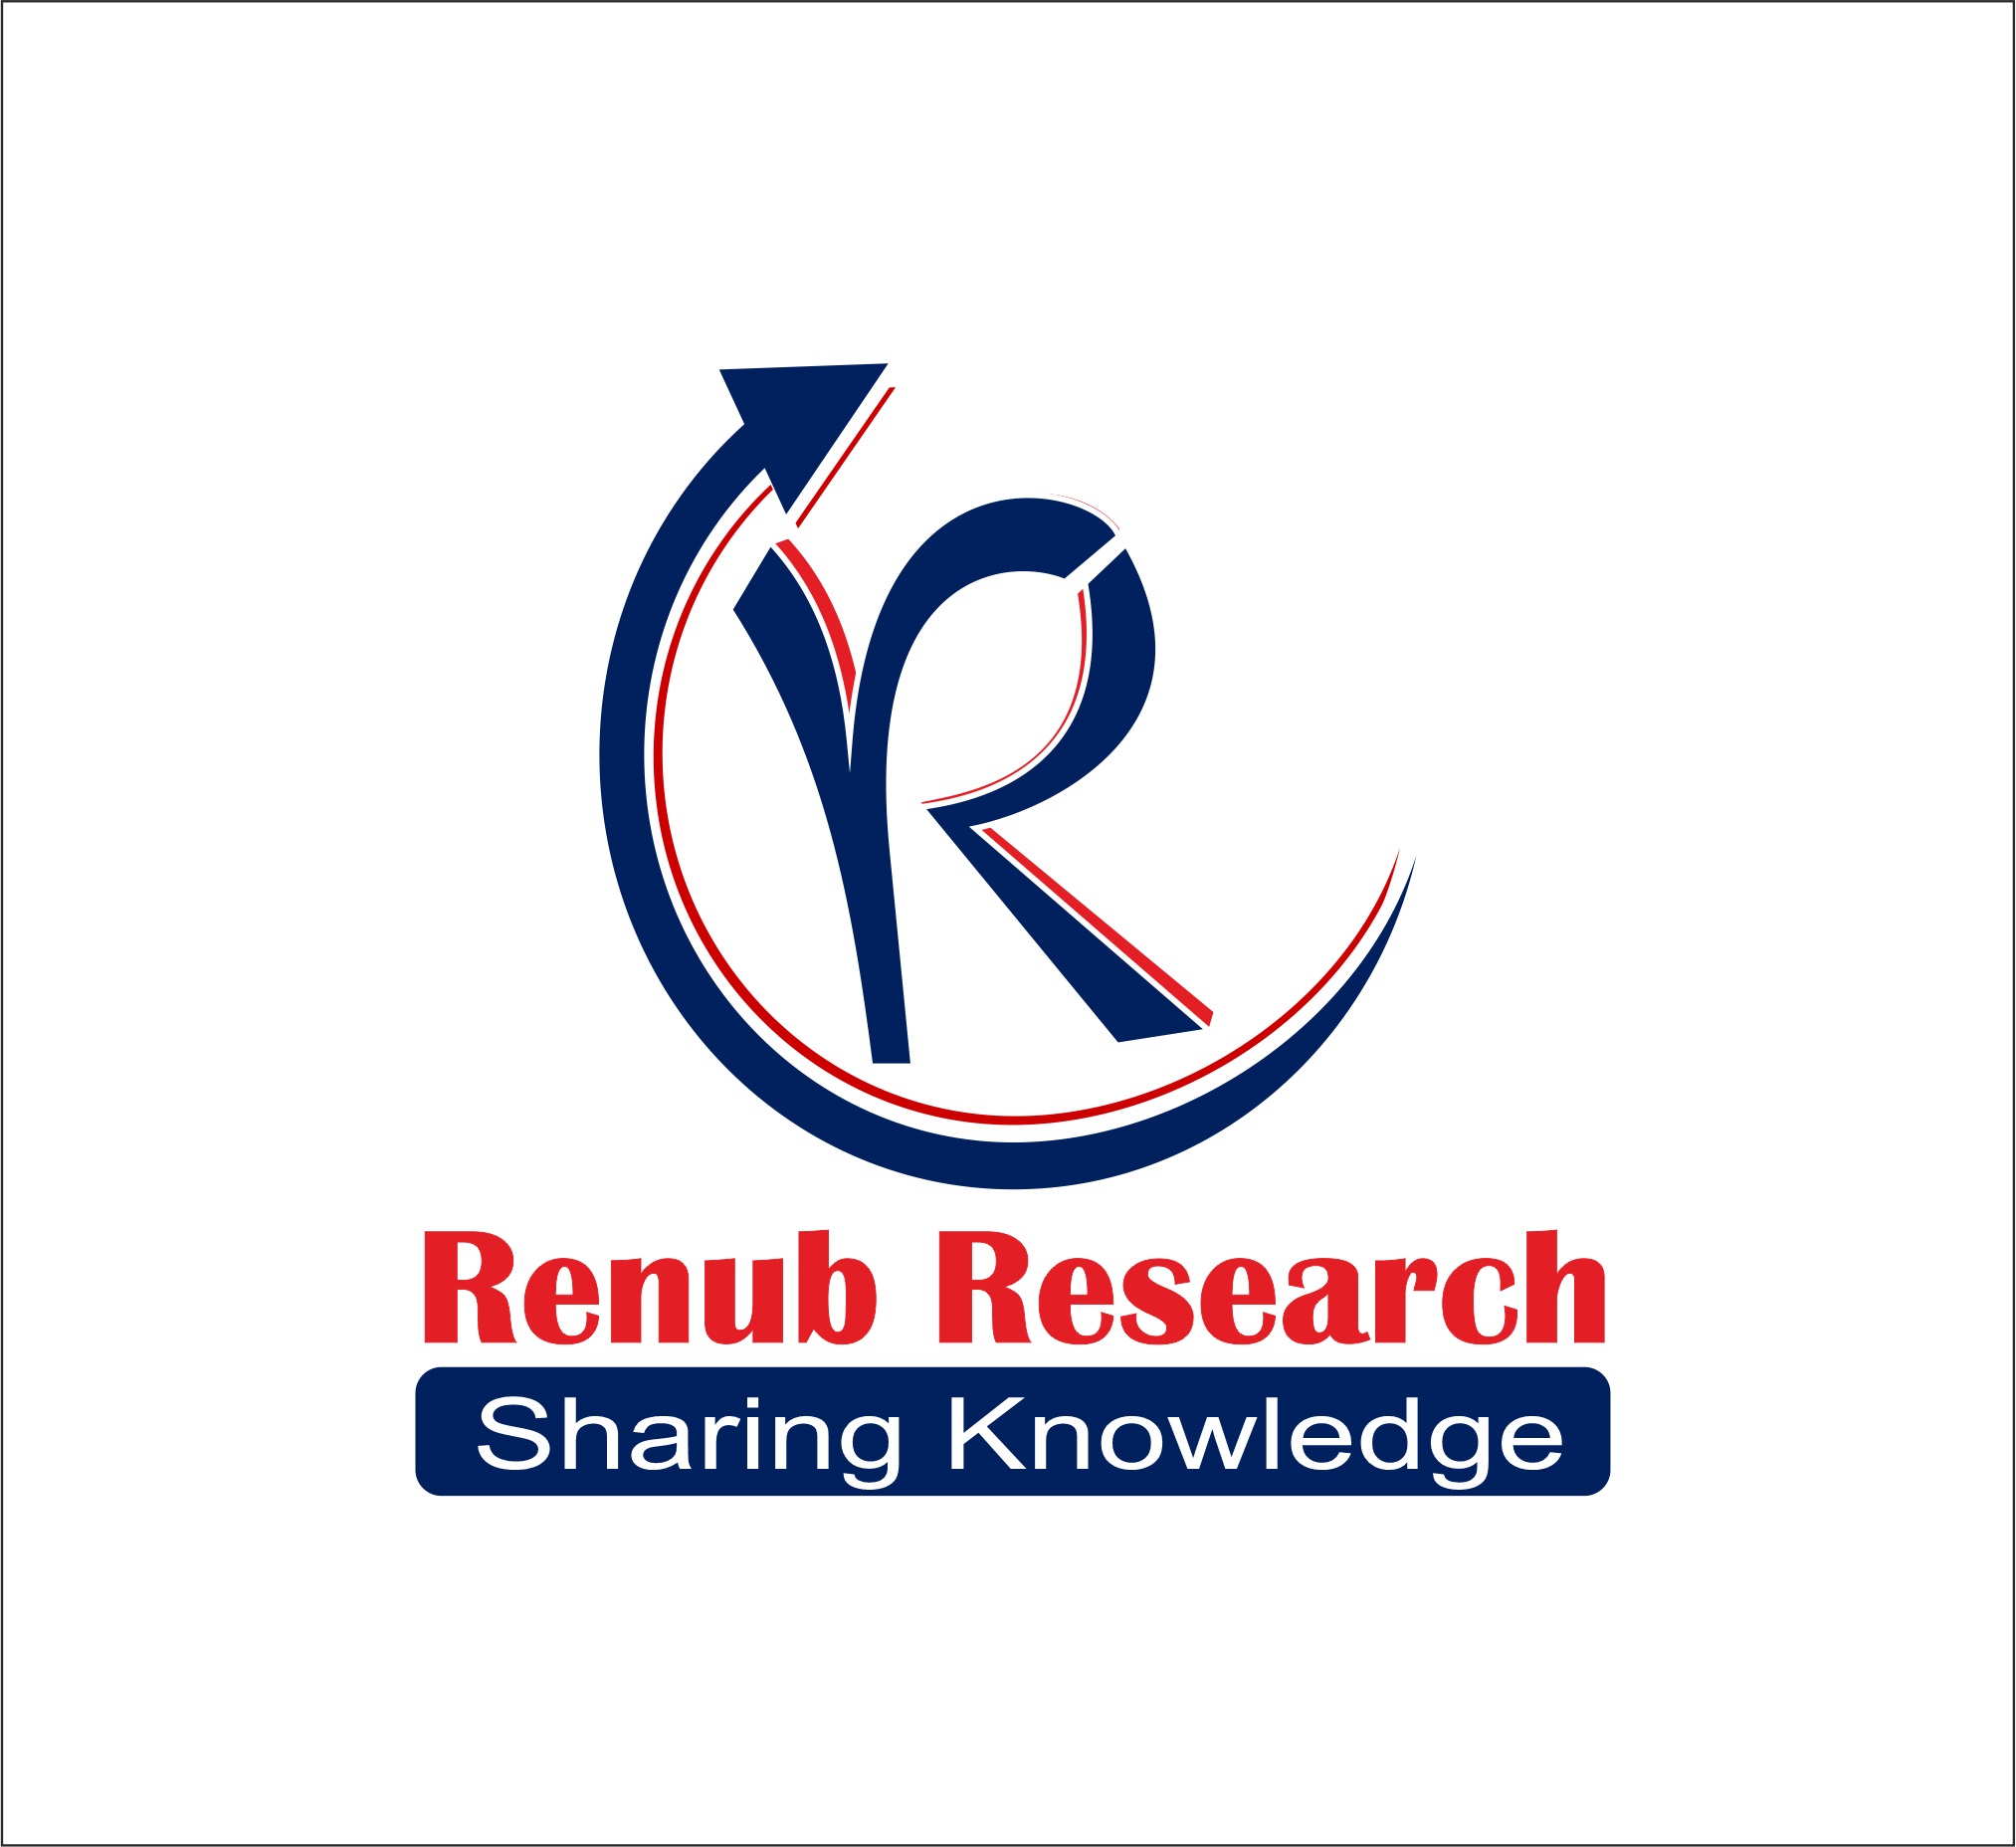 Global Meal Kit Market is estimated to surpass US$ 15.5 Billion by the end of the year 2025 - Renub Research